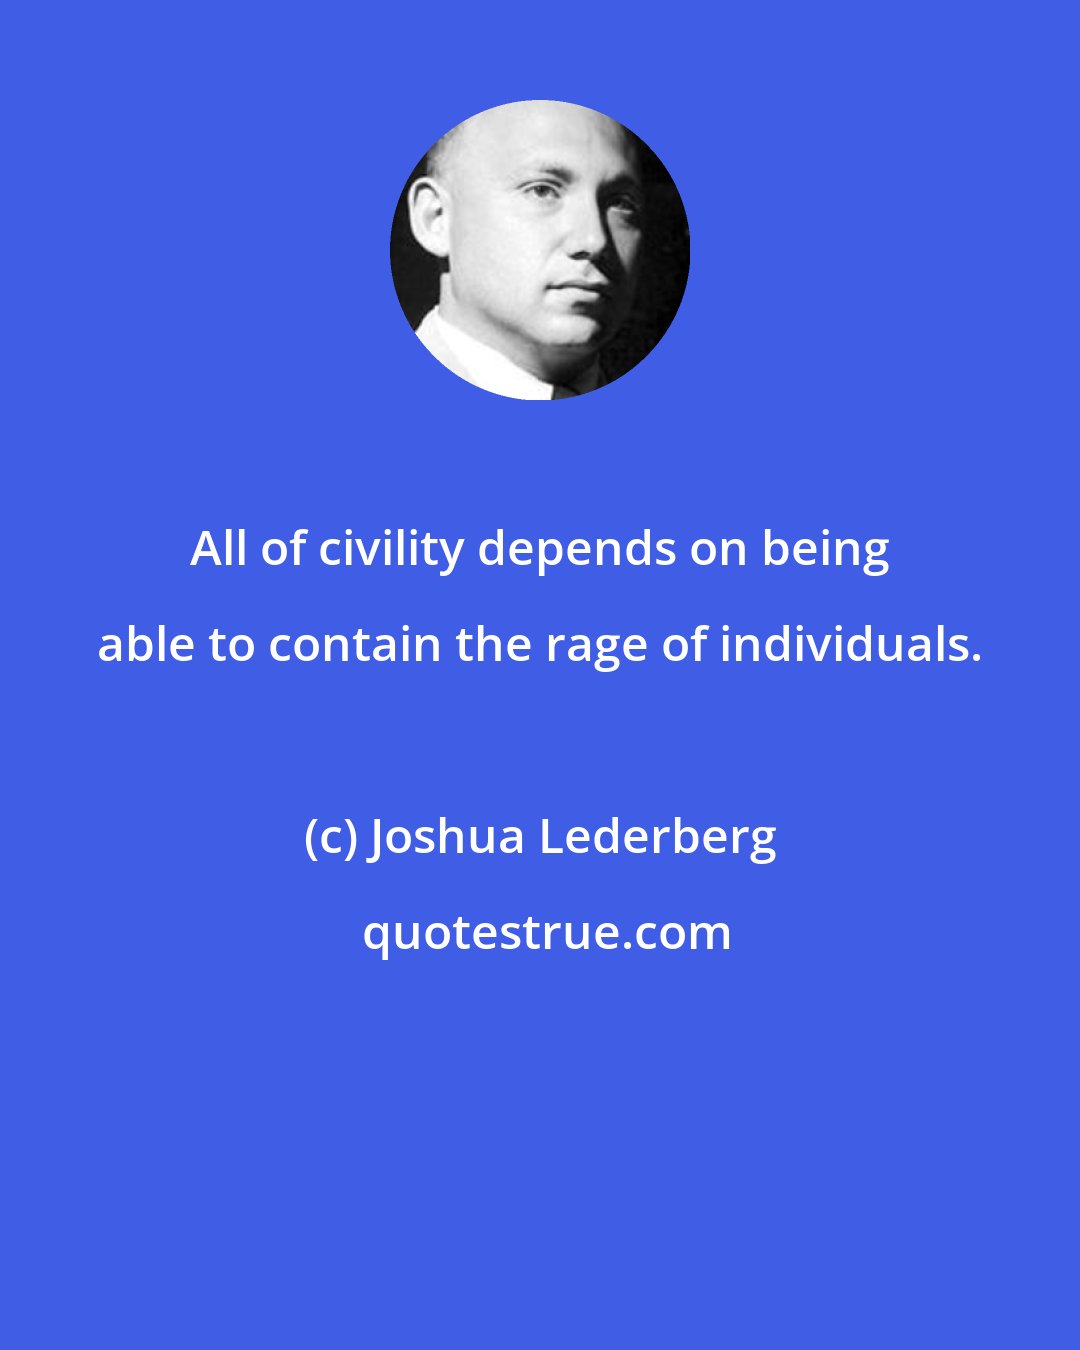 Joshua Lederberg: All of civility depends on being able to contain the rage of individuals.